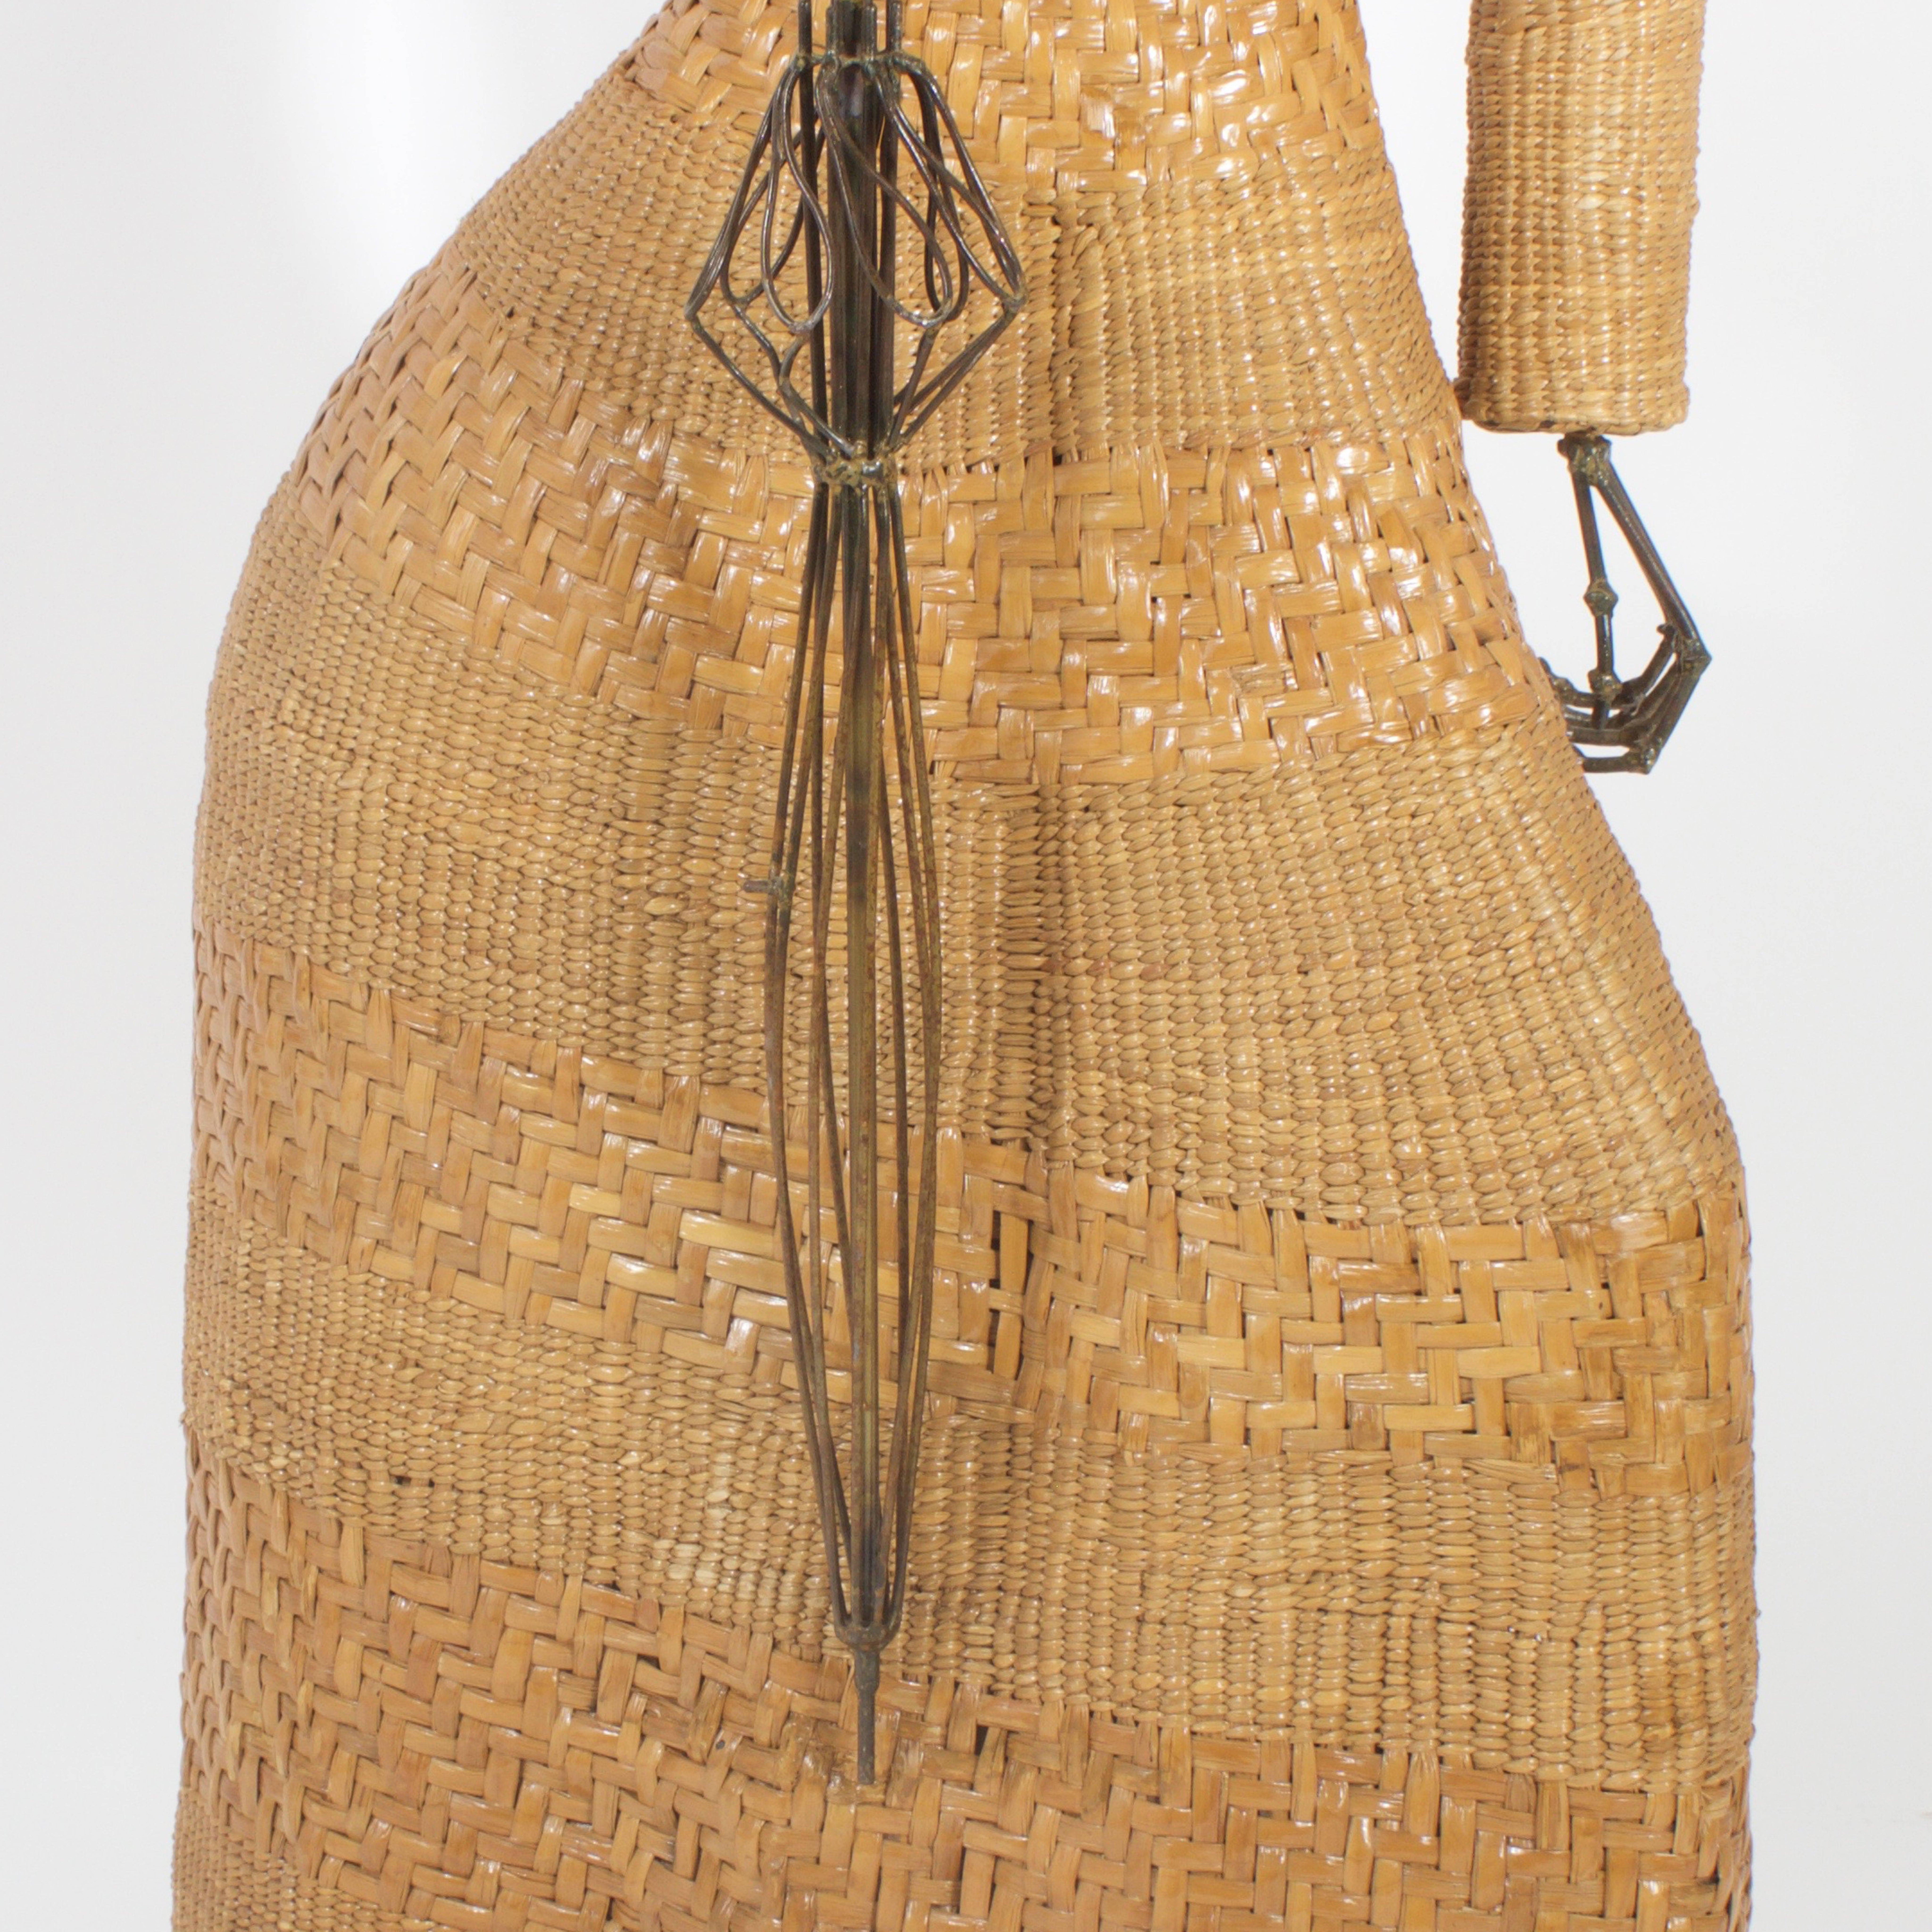 Mexican Mario Torres Wicker Sculpture of a Woman For Sale